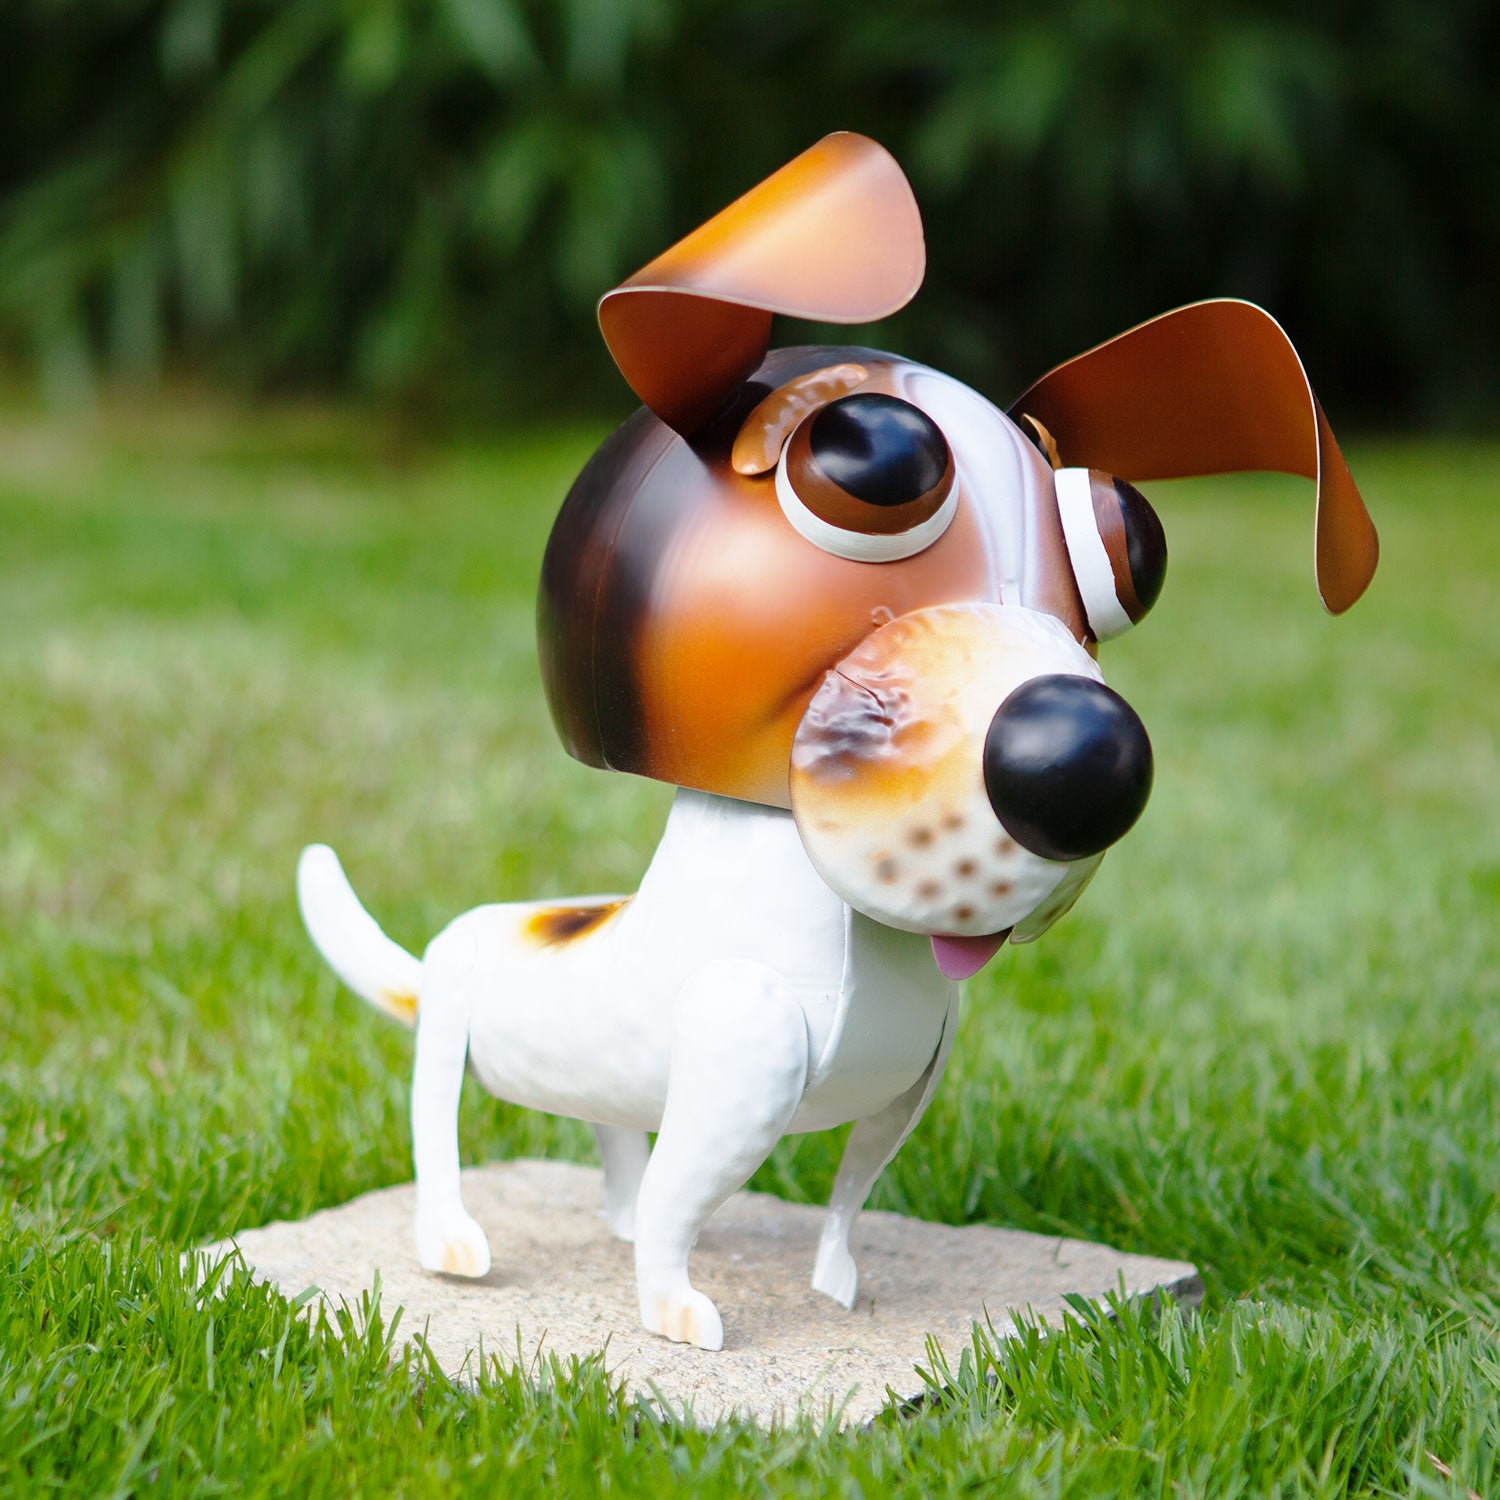 Dog Lover Gifts available at Dog Krazy Gifts – Bobble Buddies Jack Russell available at www.dogkrazygifts.co.uk